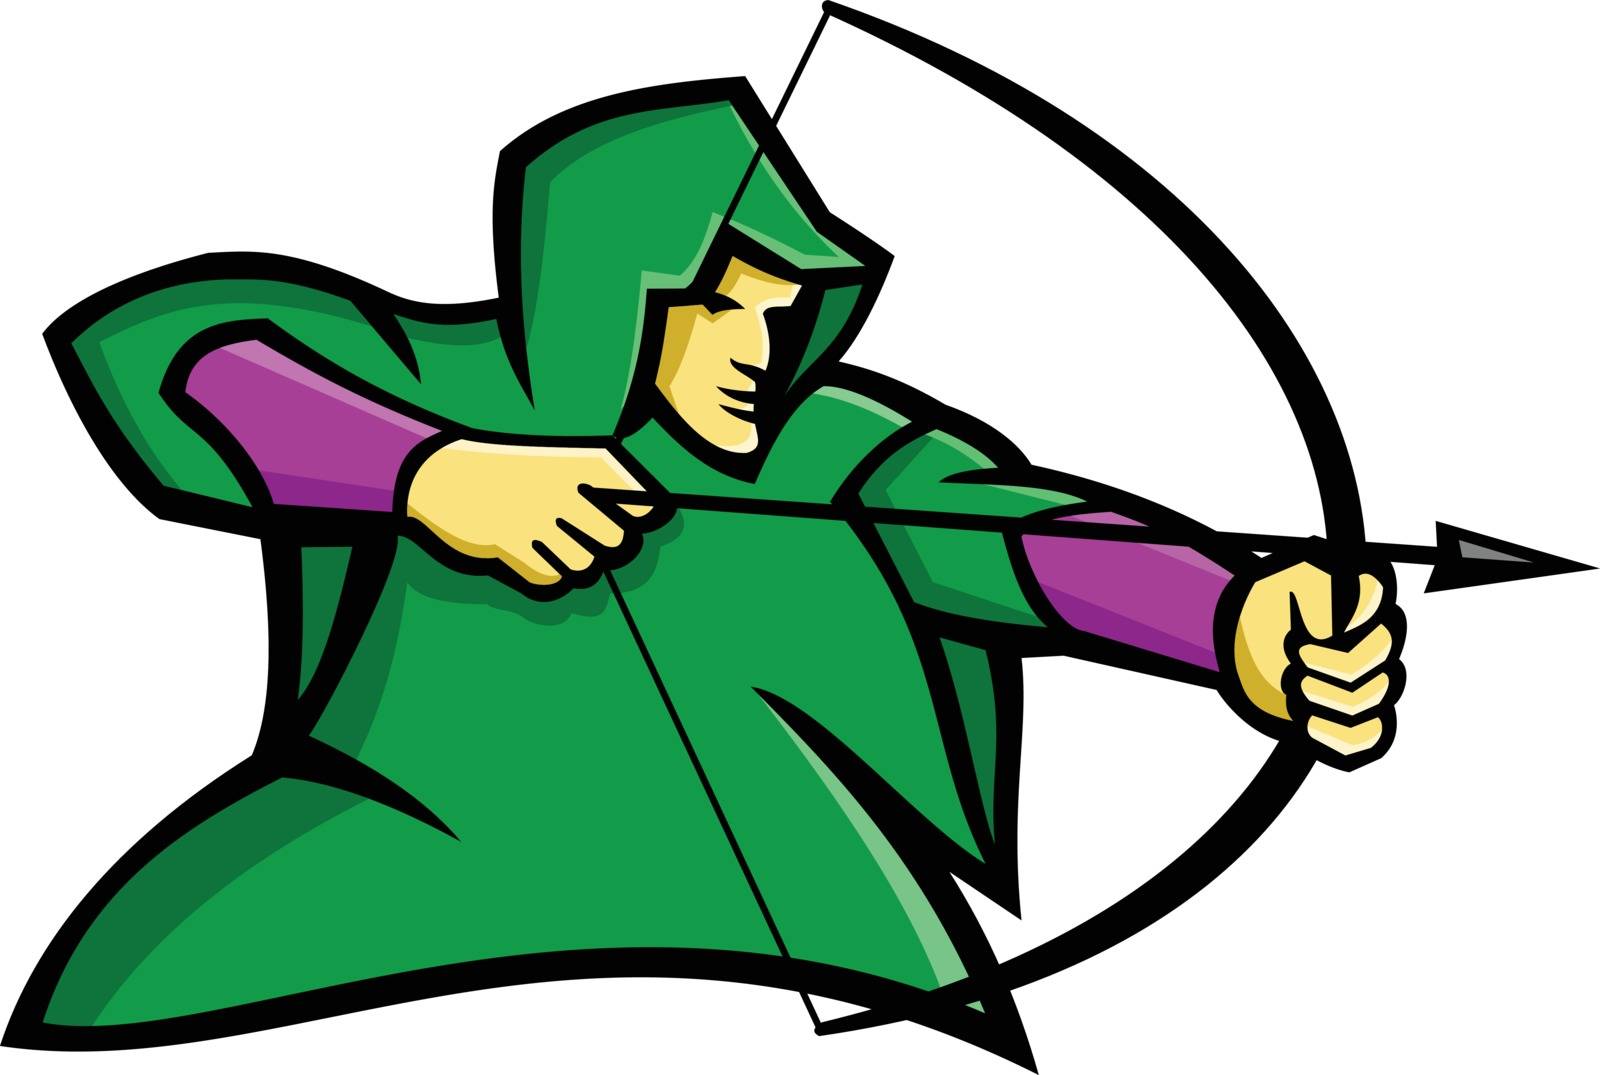 Mascot icon illustration of a medieval archer like Robin Hood, shooting a bow and arrow wearing a green hood viewed from side on isolated background in retro style.